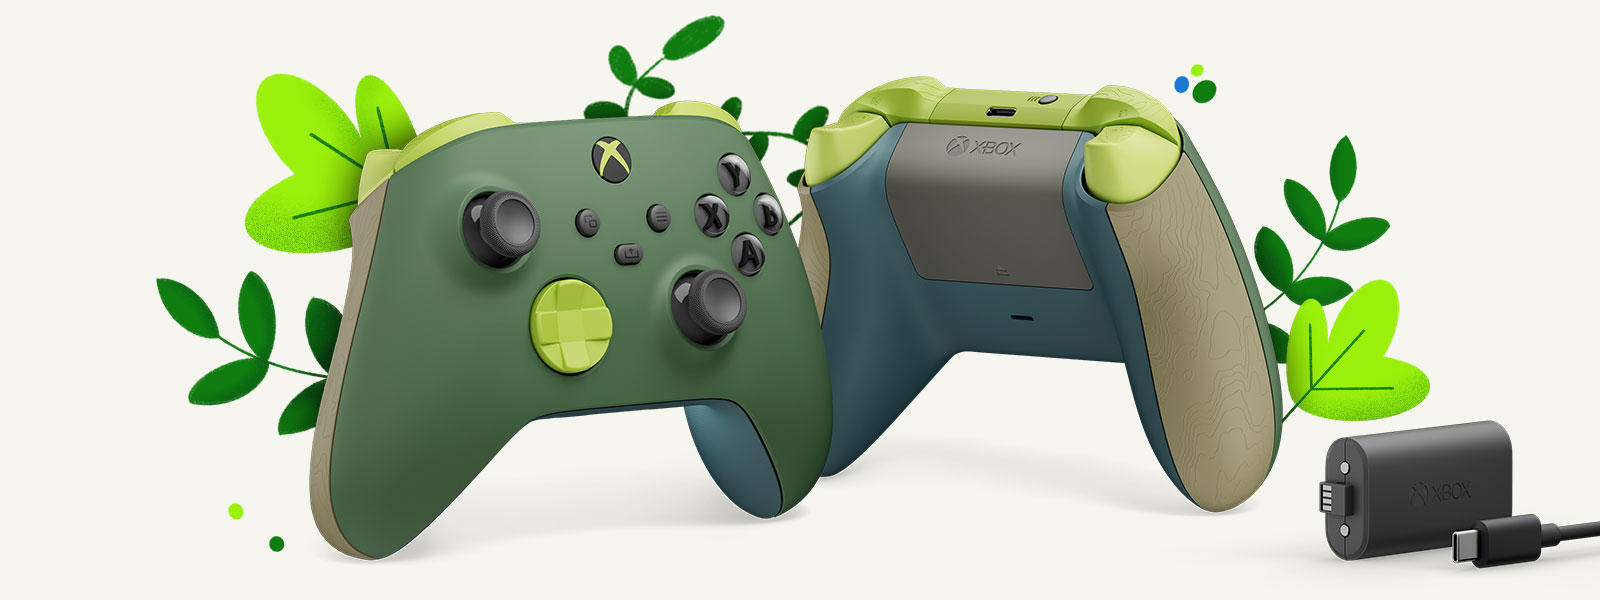 Two controllers are side by side and center aligned in front of green plants. The first controller displays the front of the Remix Special Edition Wireless Controller and the other displays the back of the Remix Special Edition Wireless Controller. The Xbox Rechargeable Battery Pack is featured on the far right.